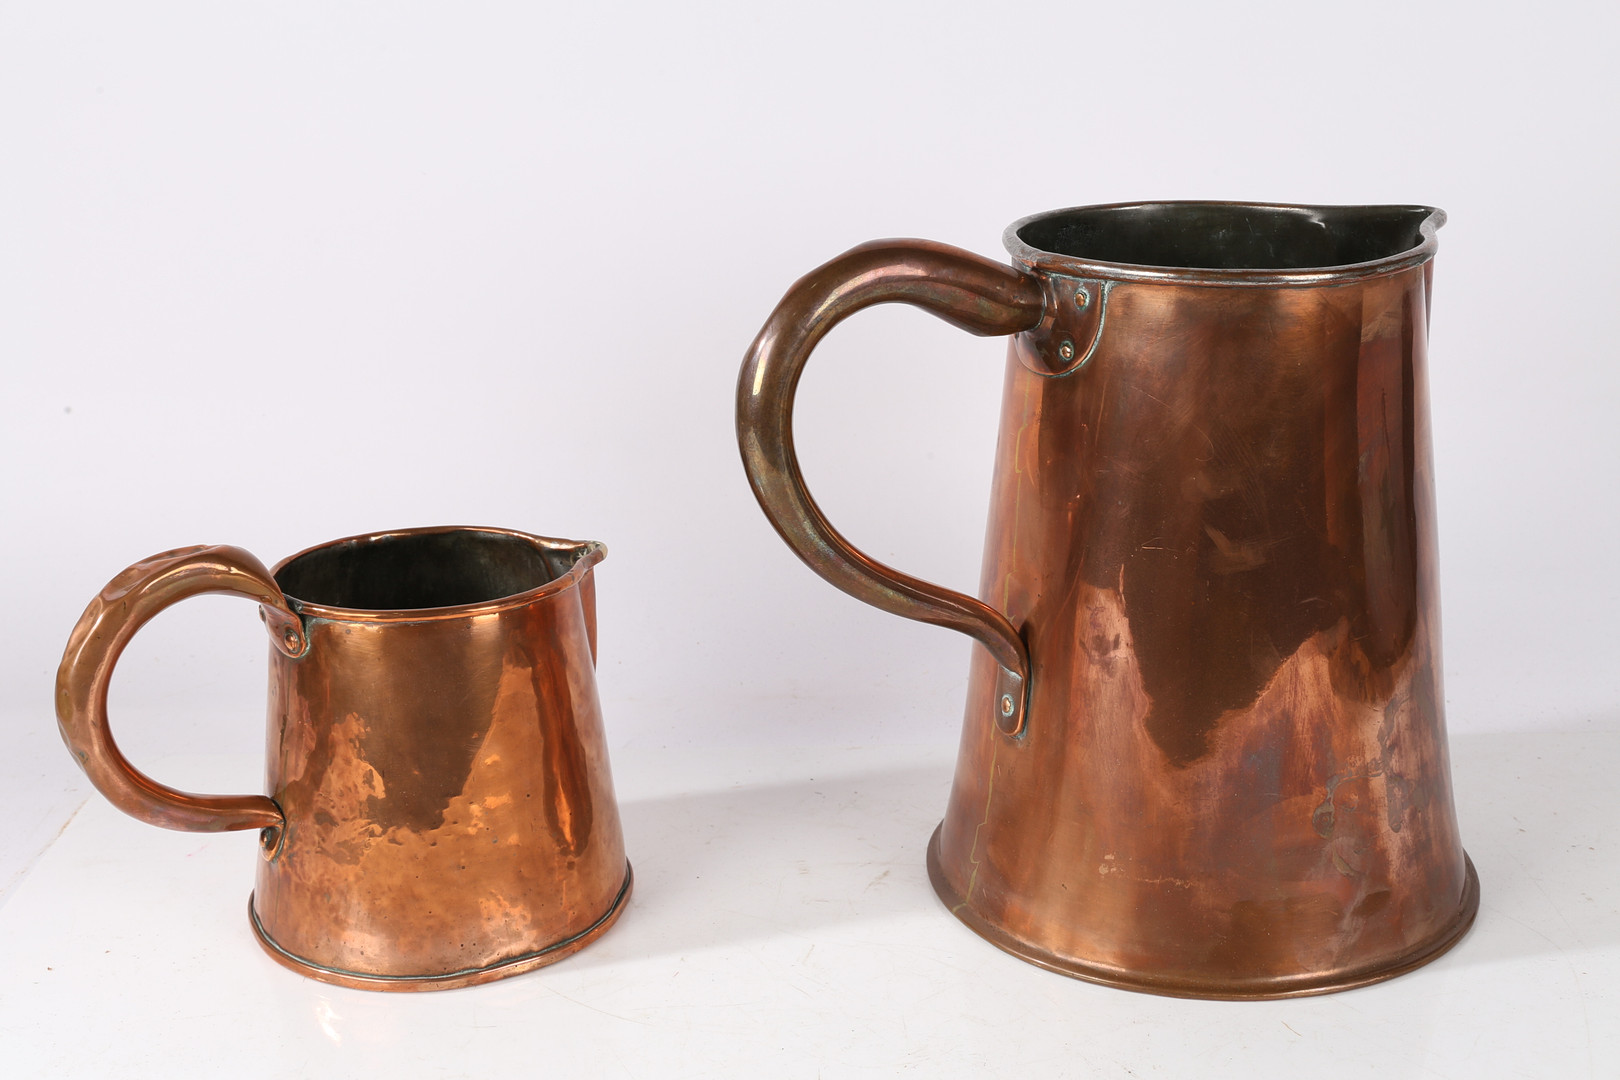 A LARGE 19TH CENTURY COPPER JUG AND A SMALLER EXAMPLE (2). - Image 4 of 7